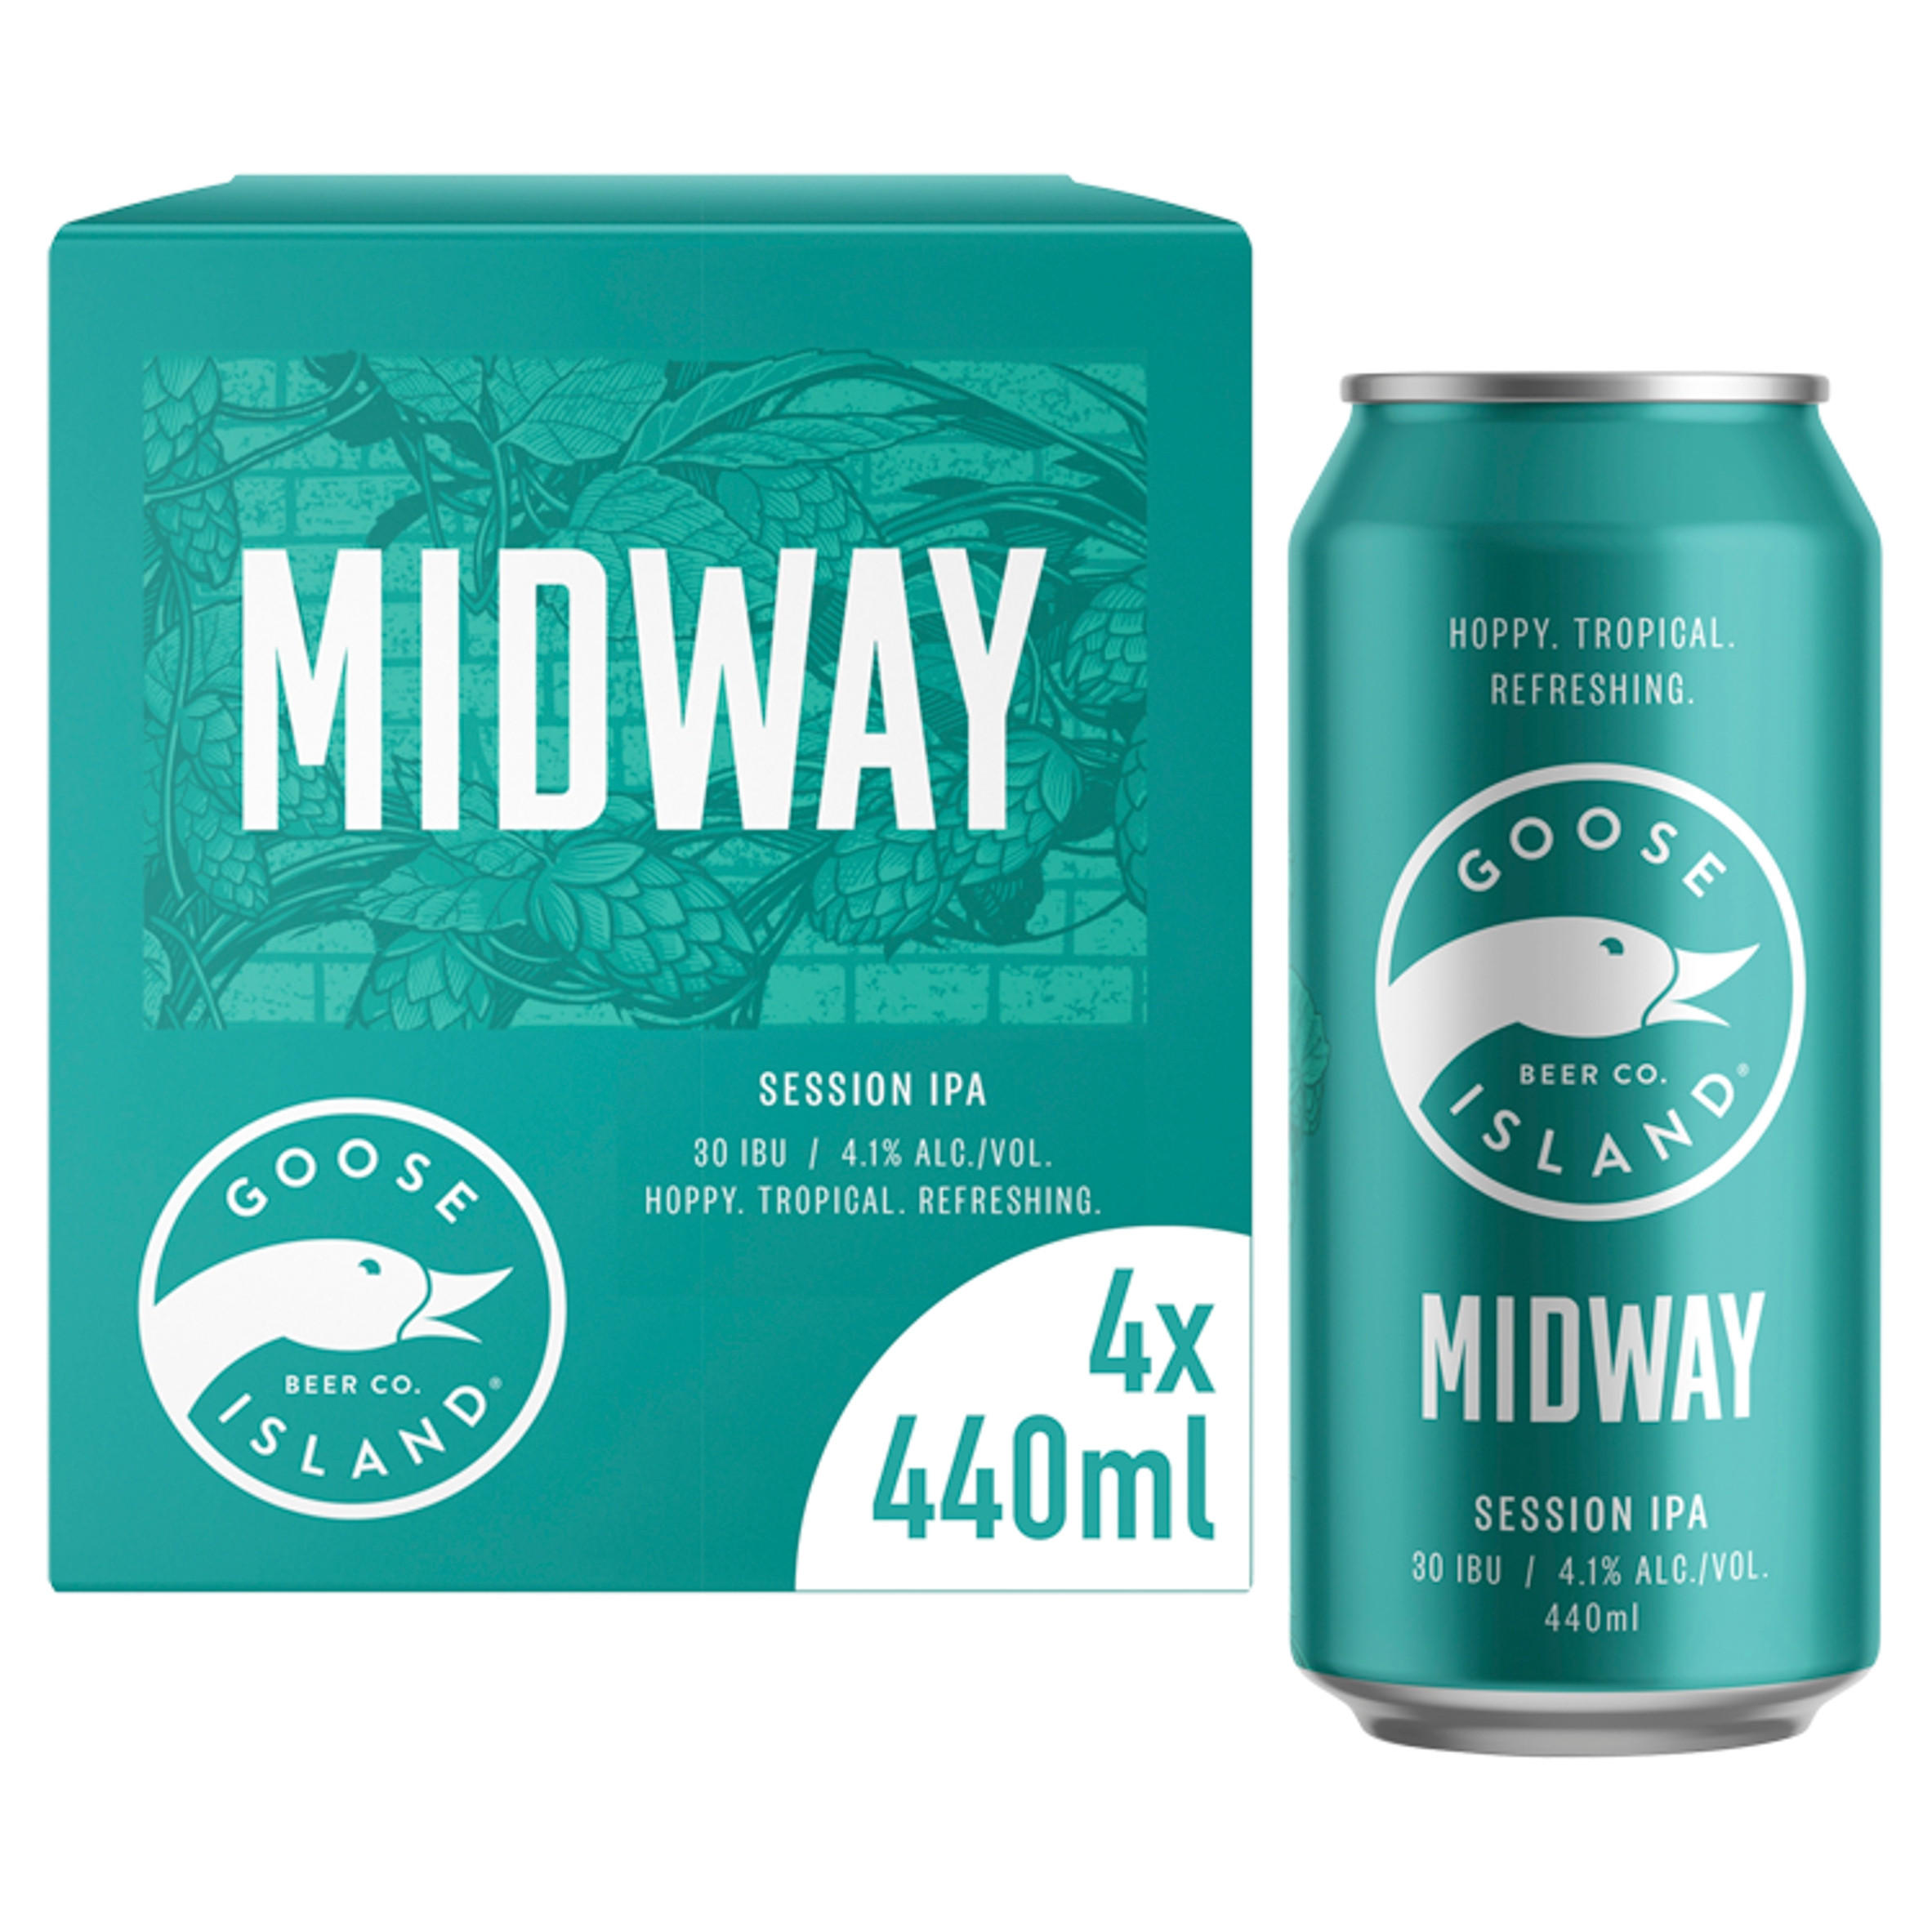 Goose Island Midway Session IPA 4 x 440ml Beer Iceland Foods